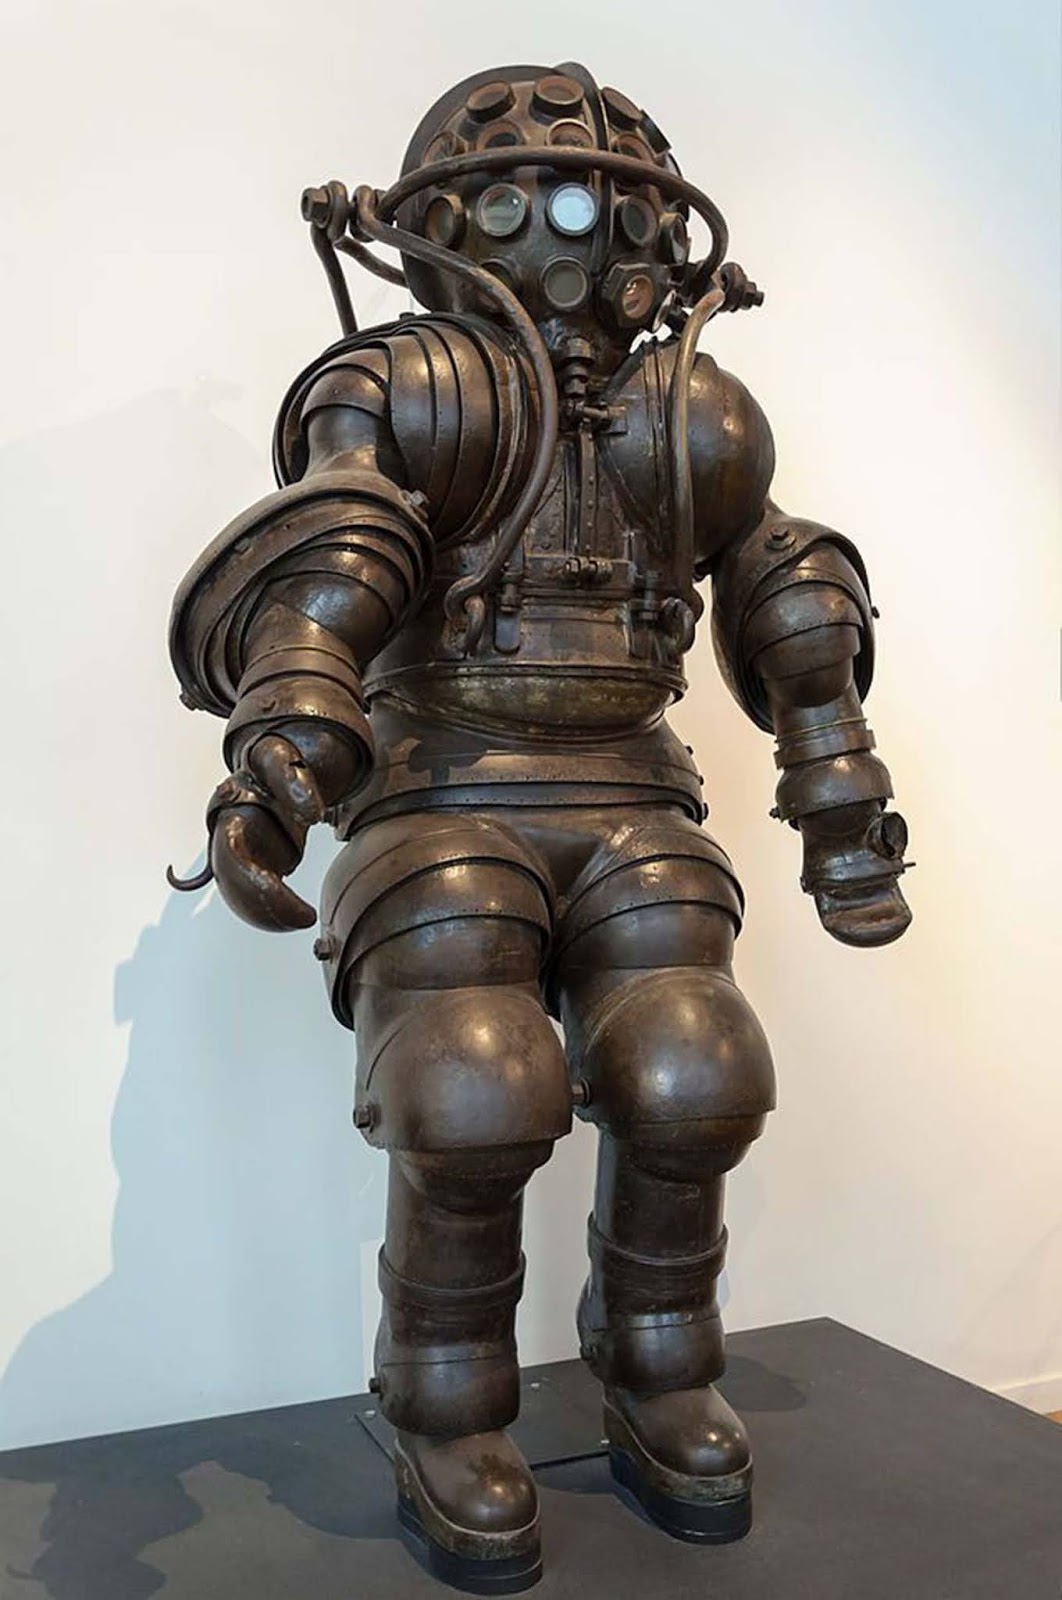 Diving suit designed by Alphonse and Theodore Carmagnolle.